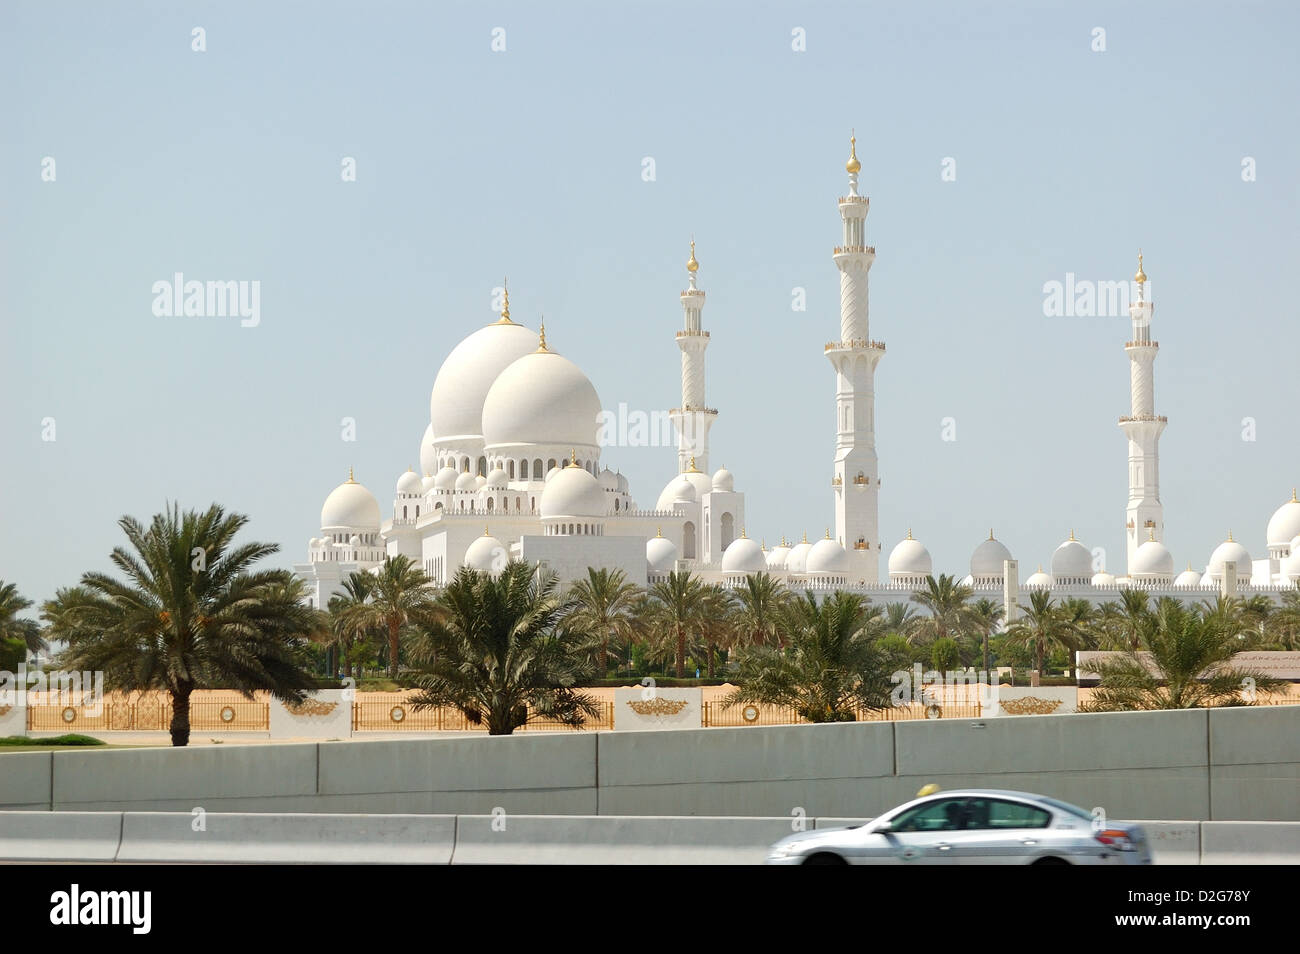 The view from highway on Sheikh Zayed Grand Mosque, Abu Dhabi, UAE Stock Photo